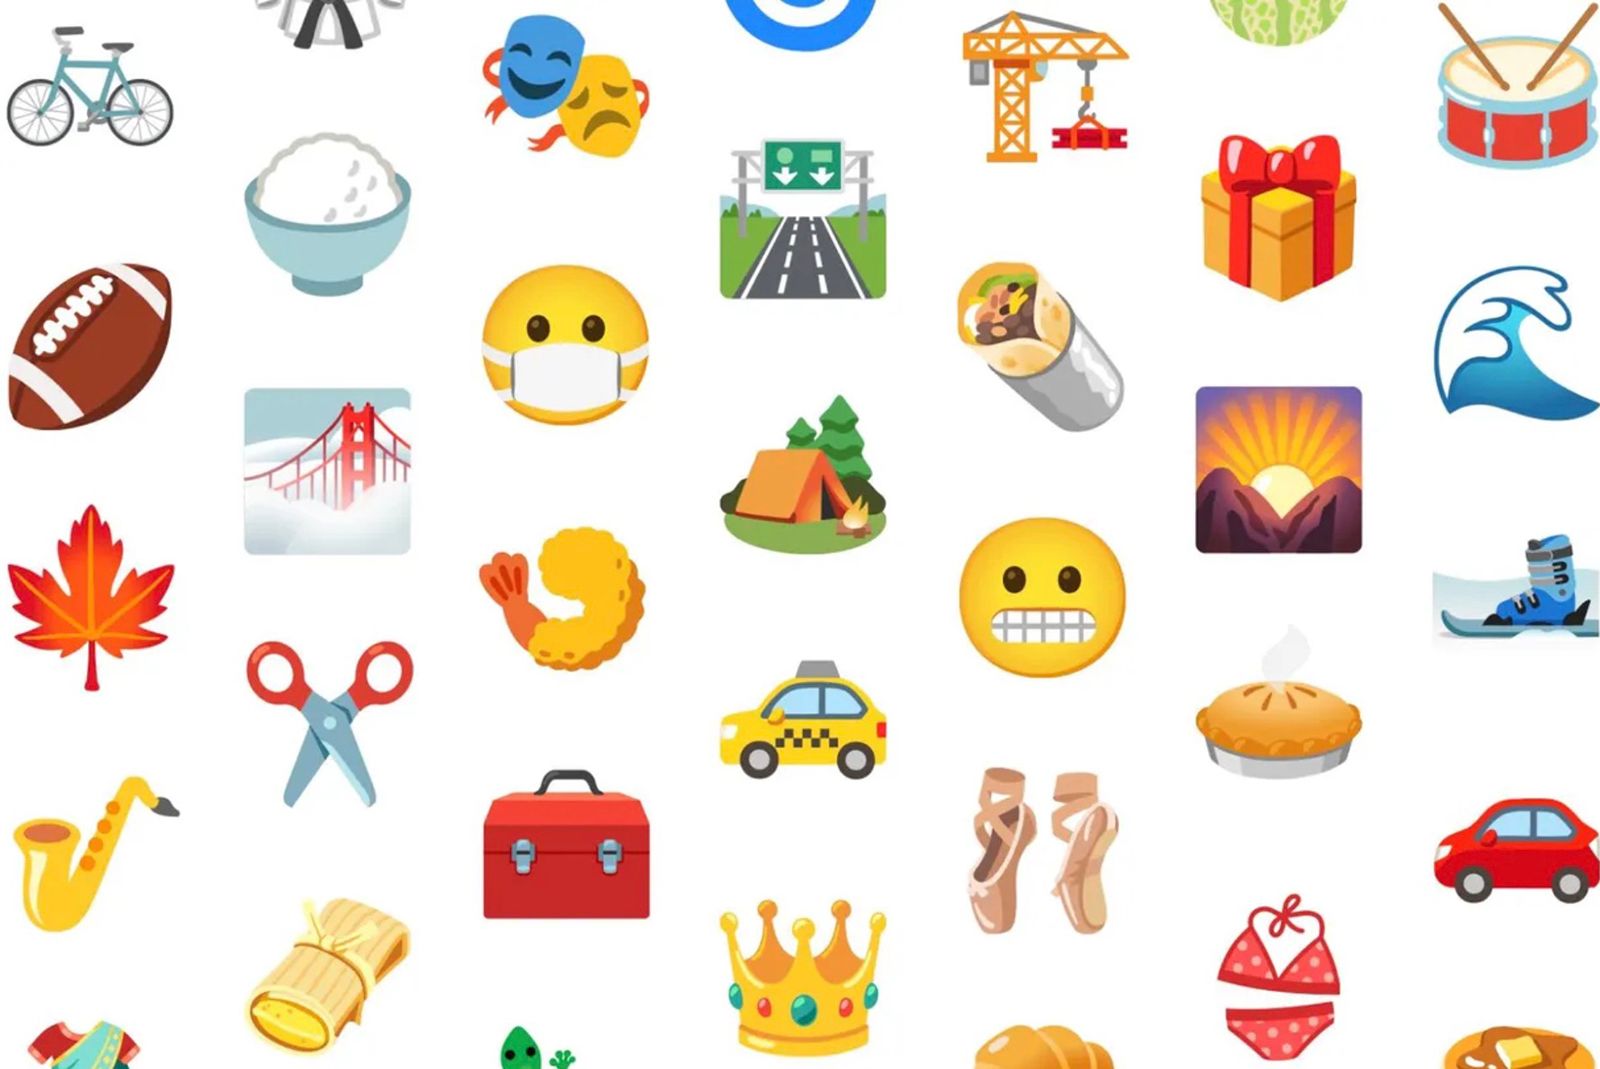 Google redesigns its emoji to be more universal and authentic photo 1